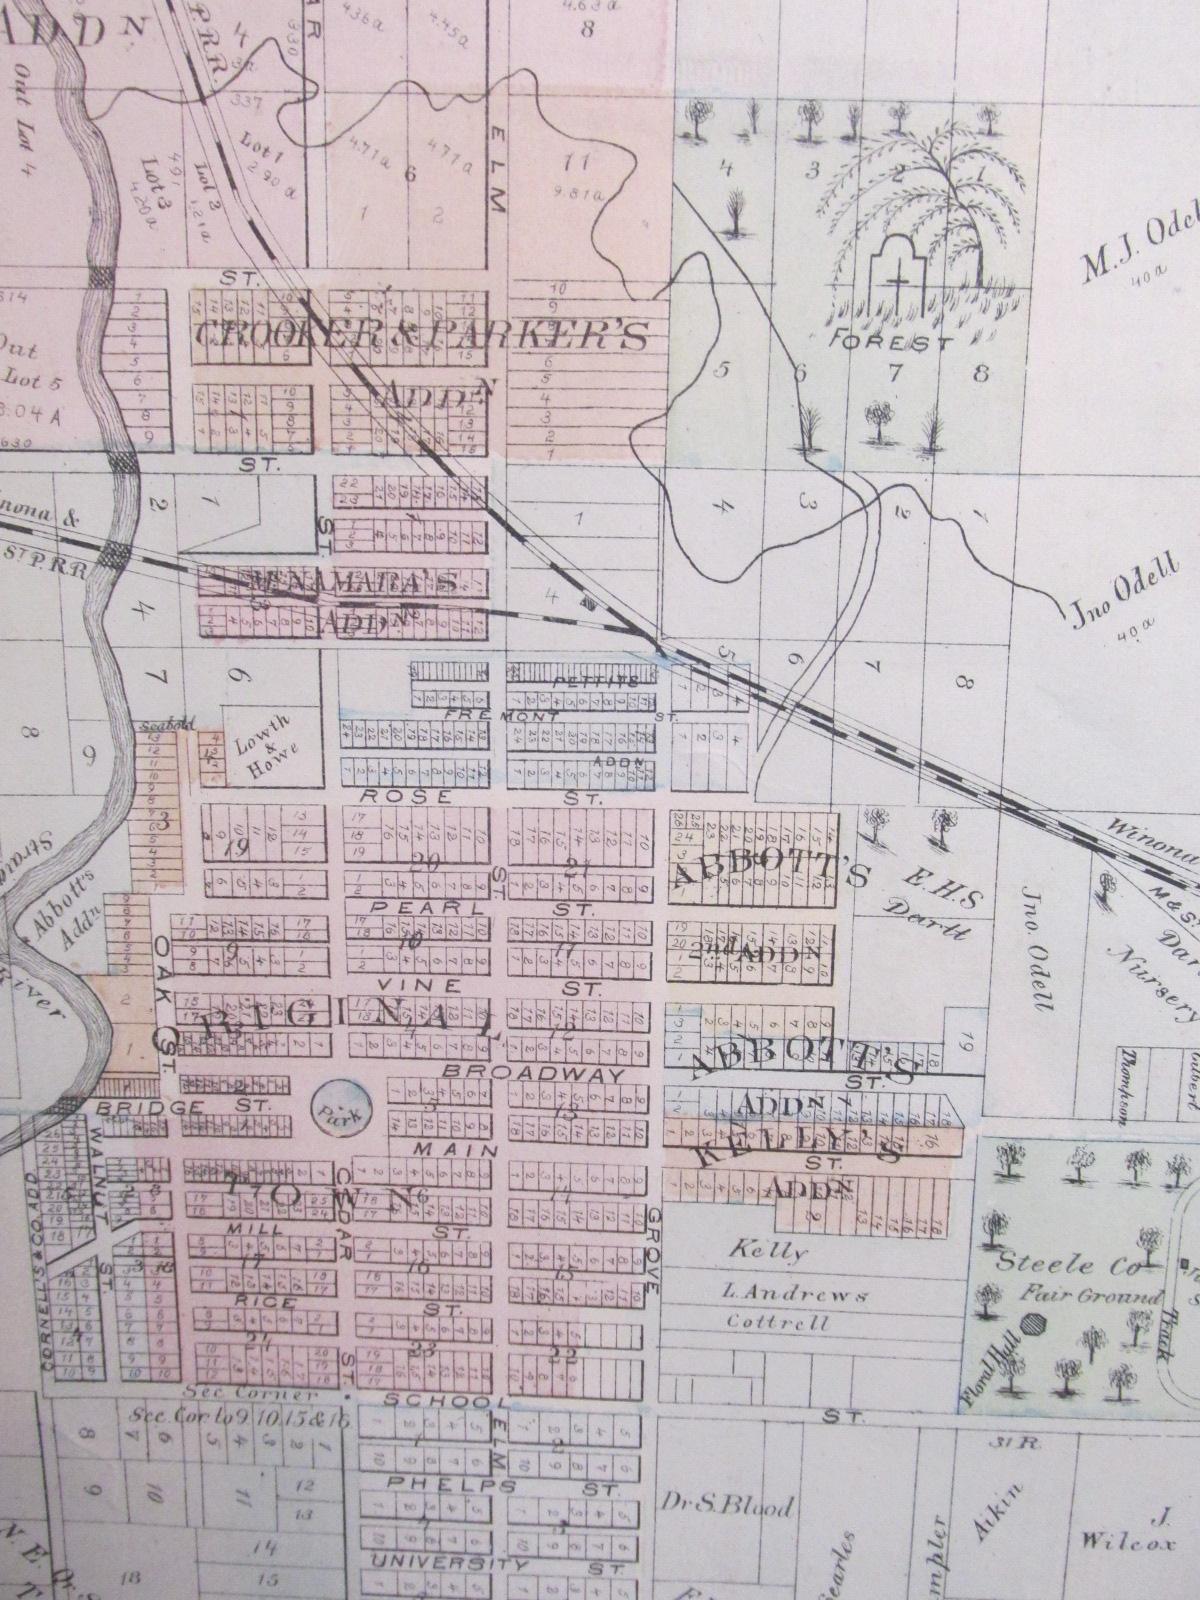 1874 Maps of Towns: Lake City, Kasson, Owatonna & 4 Maps of Mantorville